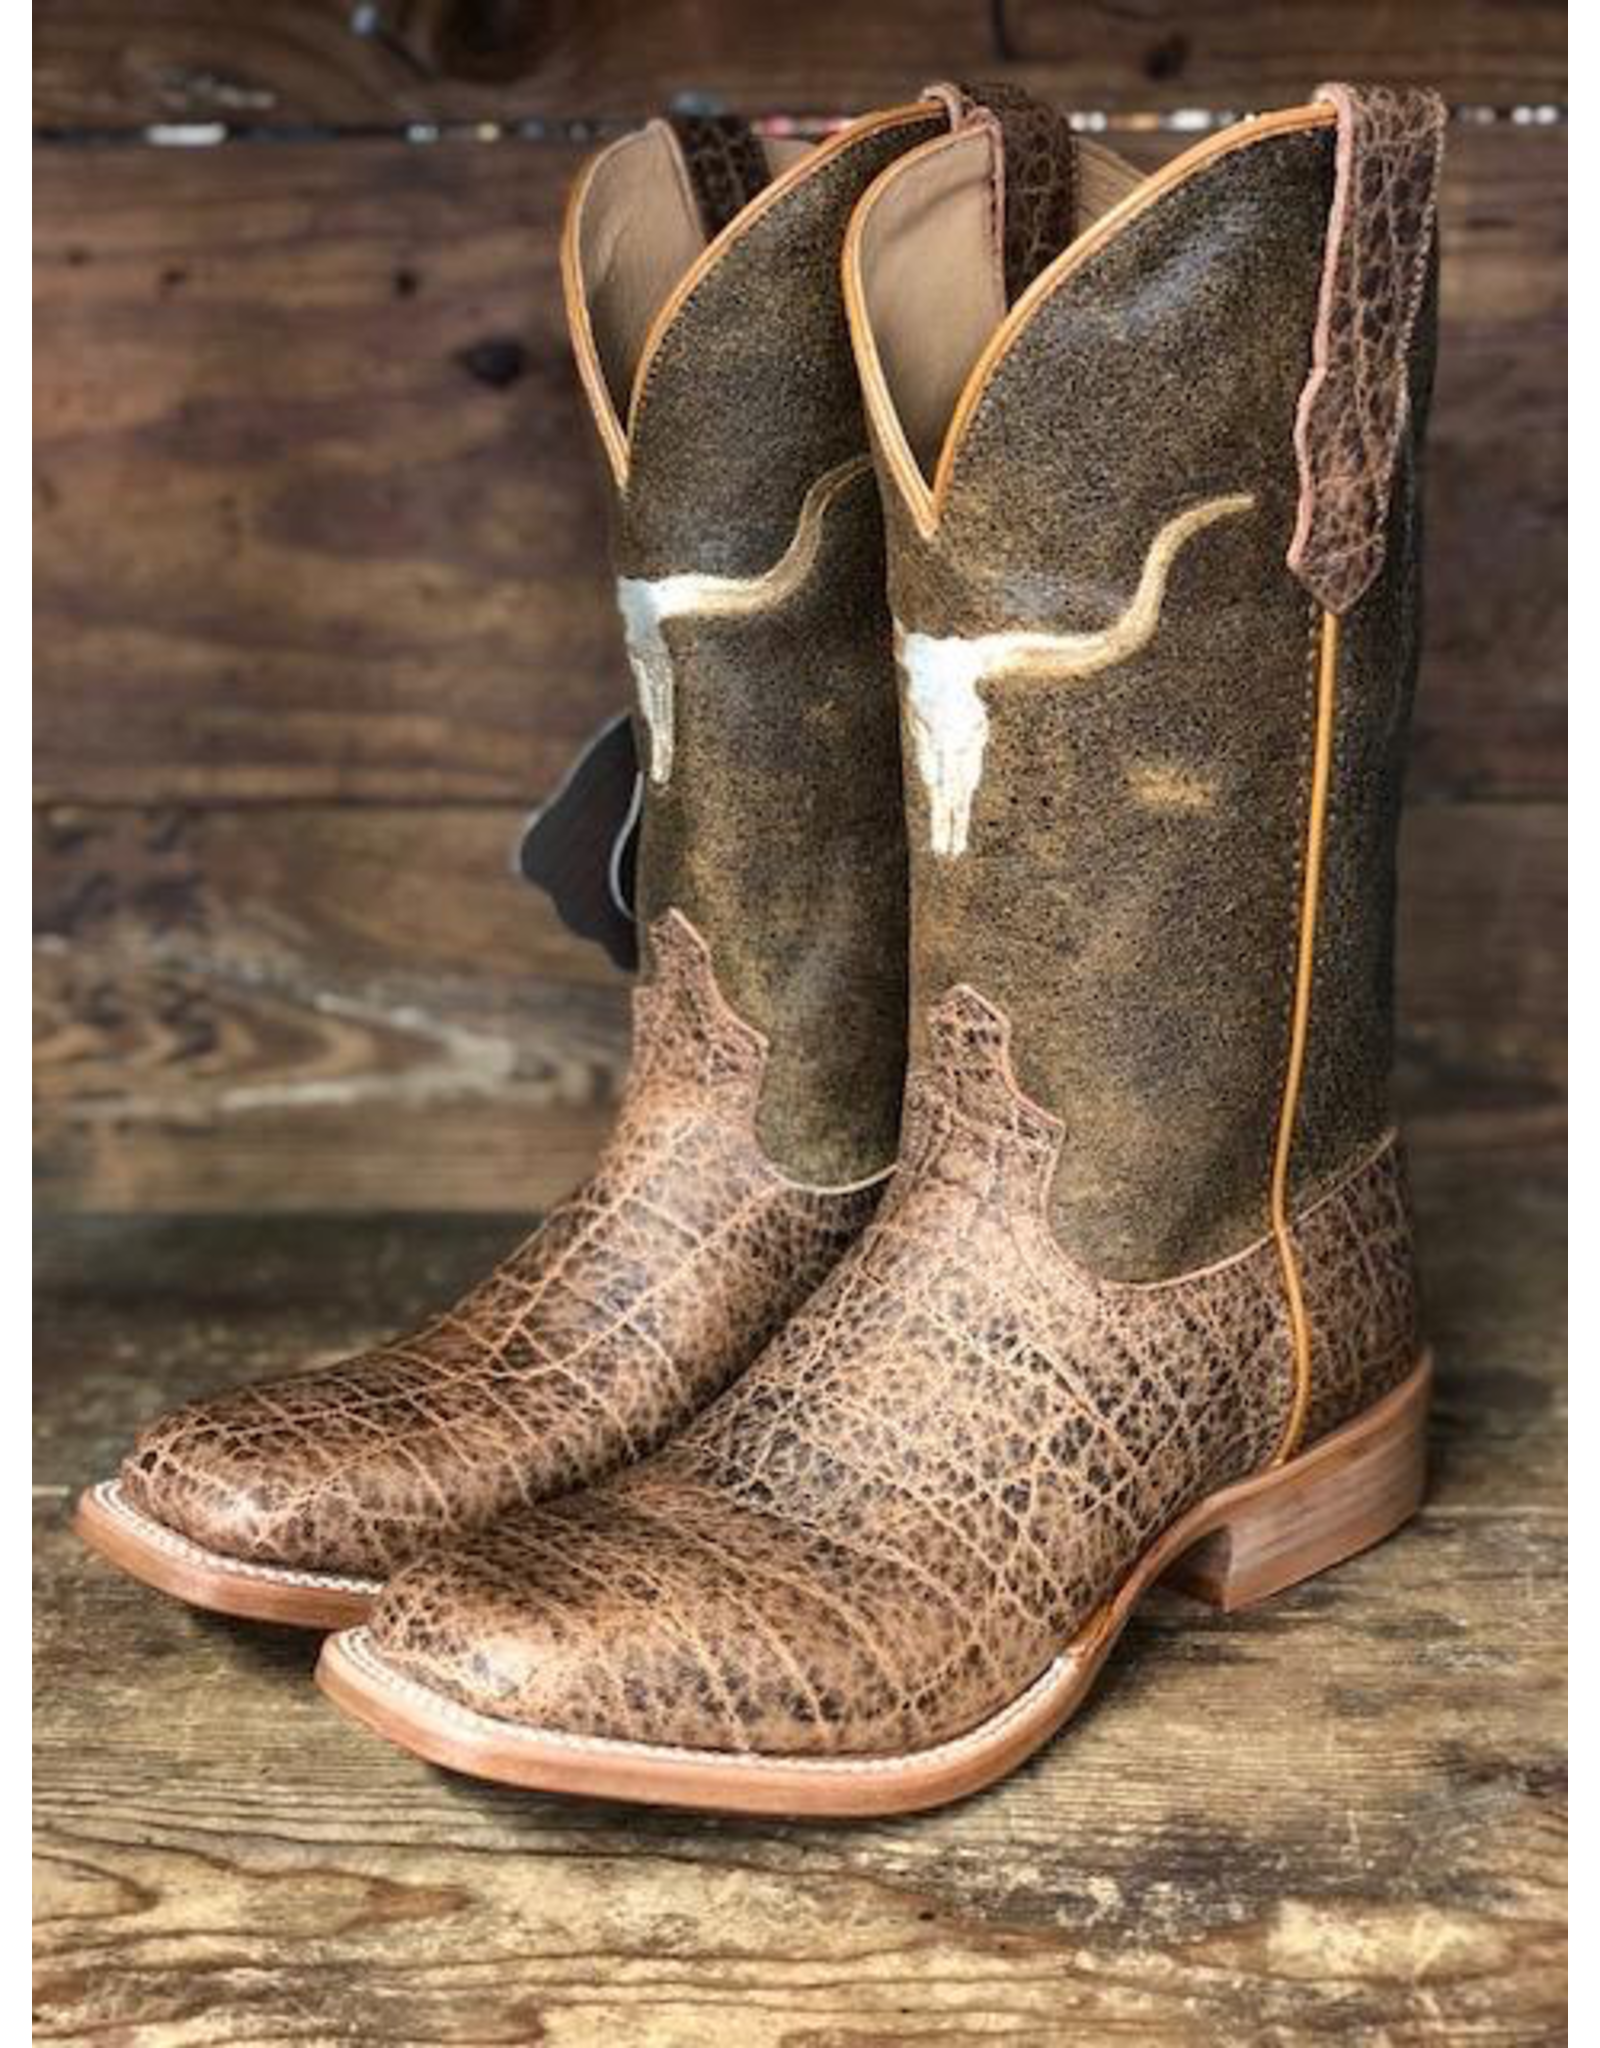 twisted x mens boots